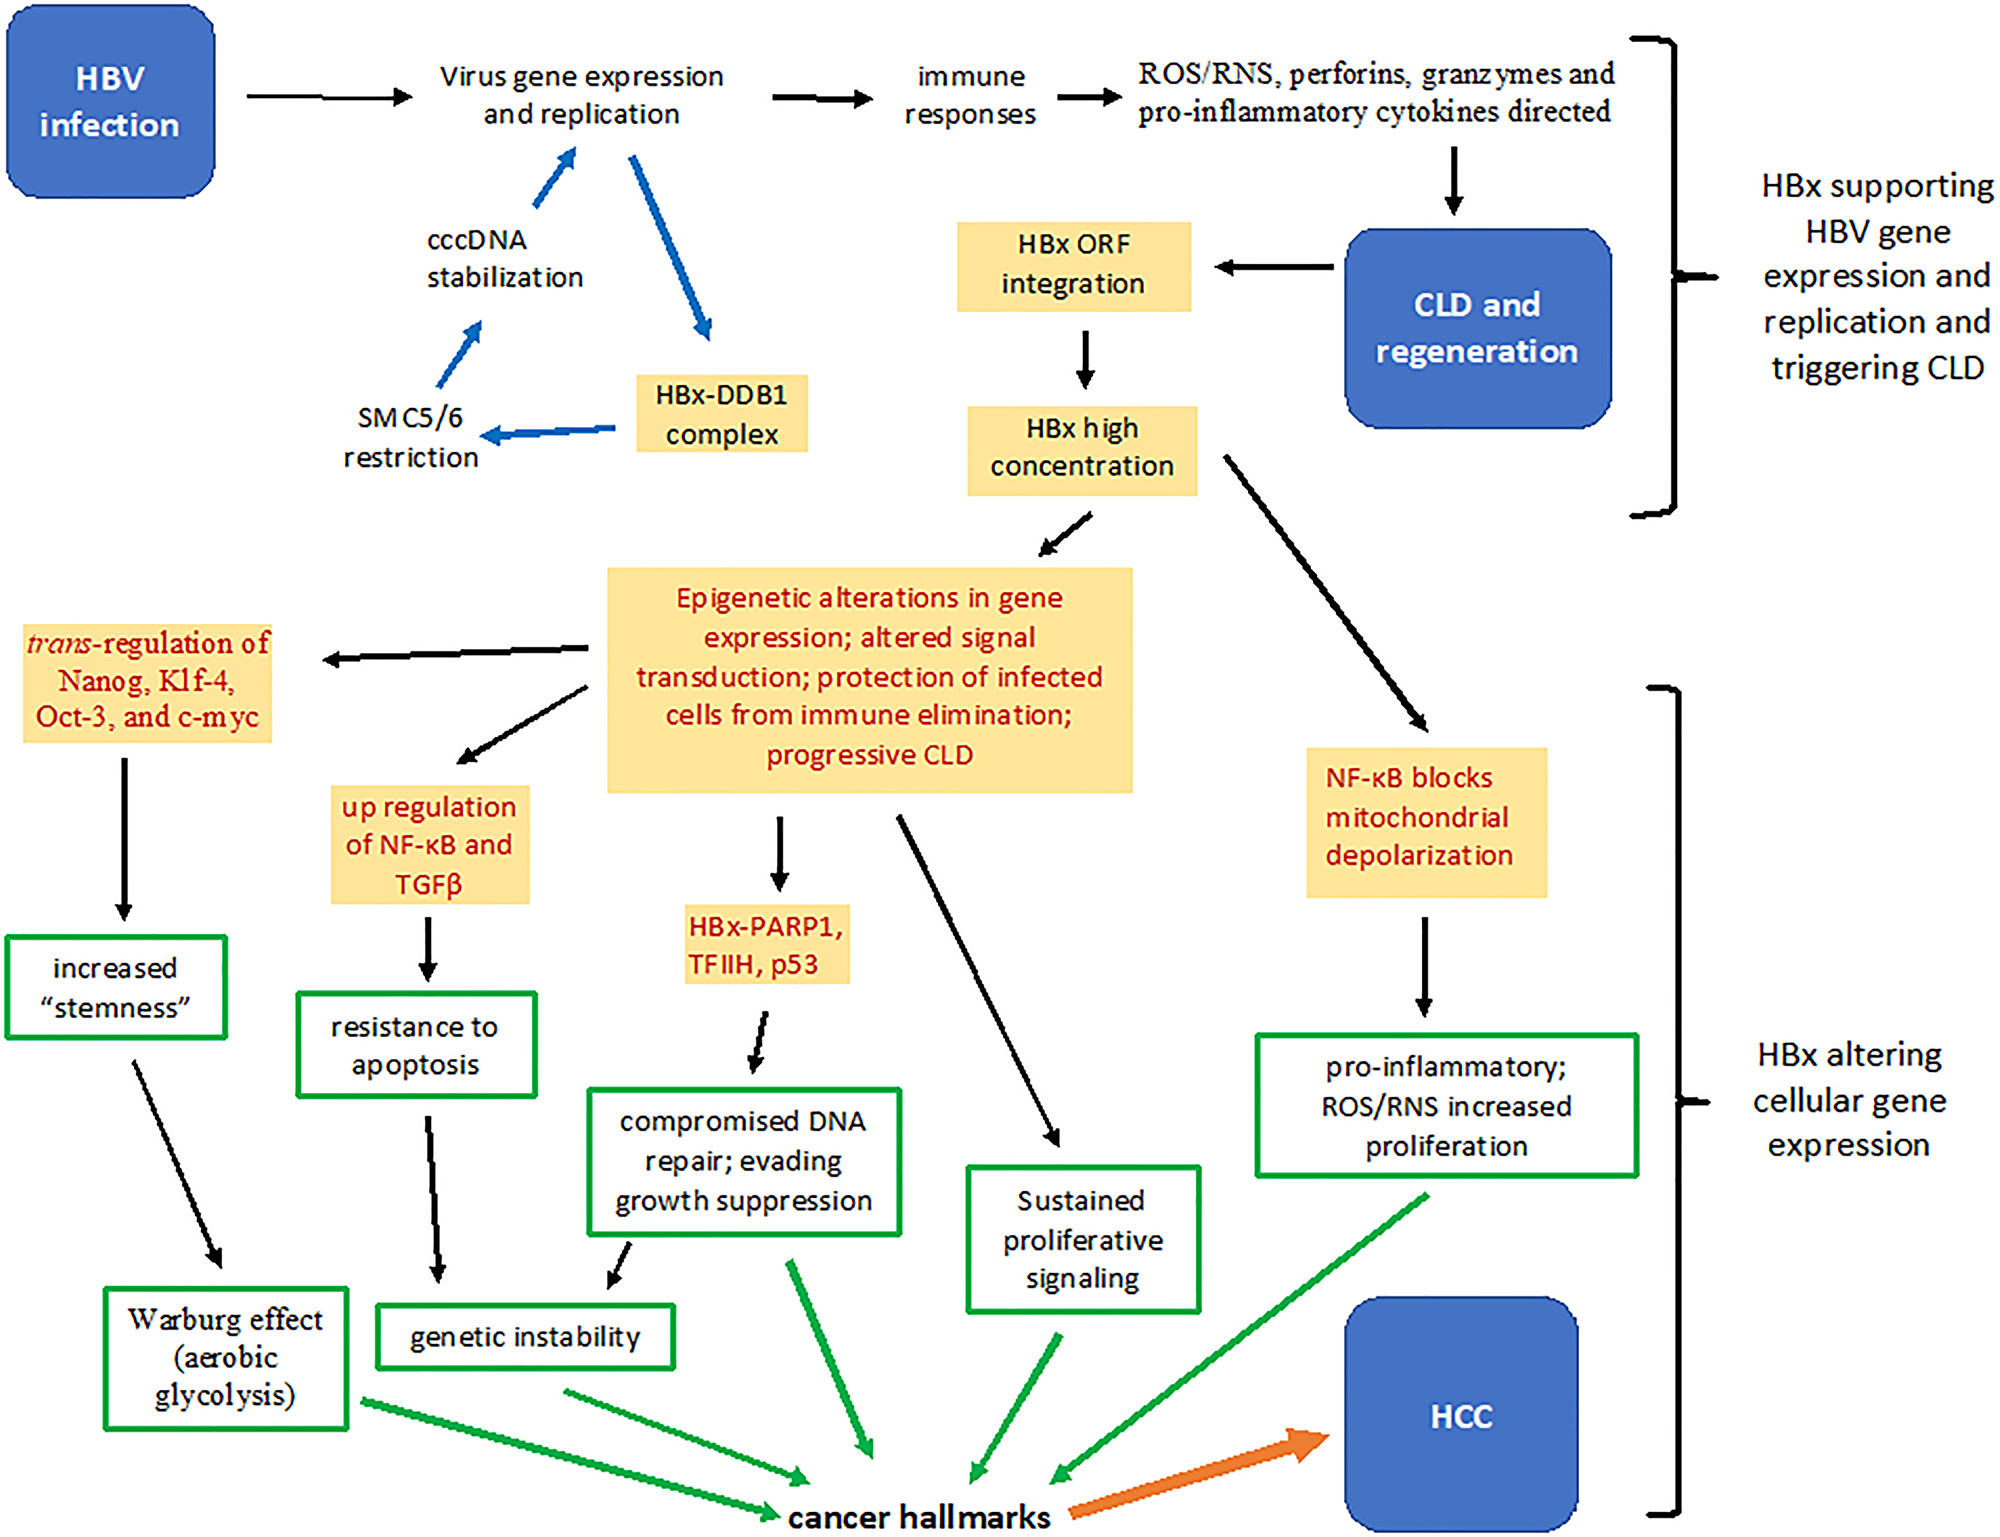 Summary of several HBx functions that contribute to the pathogenesis of chronic liver disease and hepatocellular carcinoma.